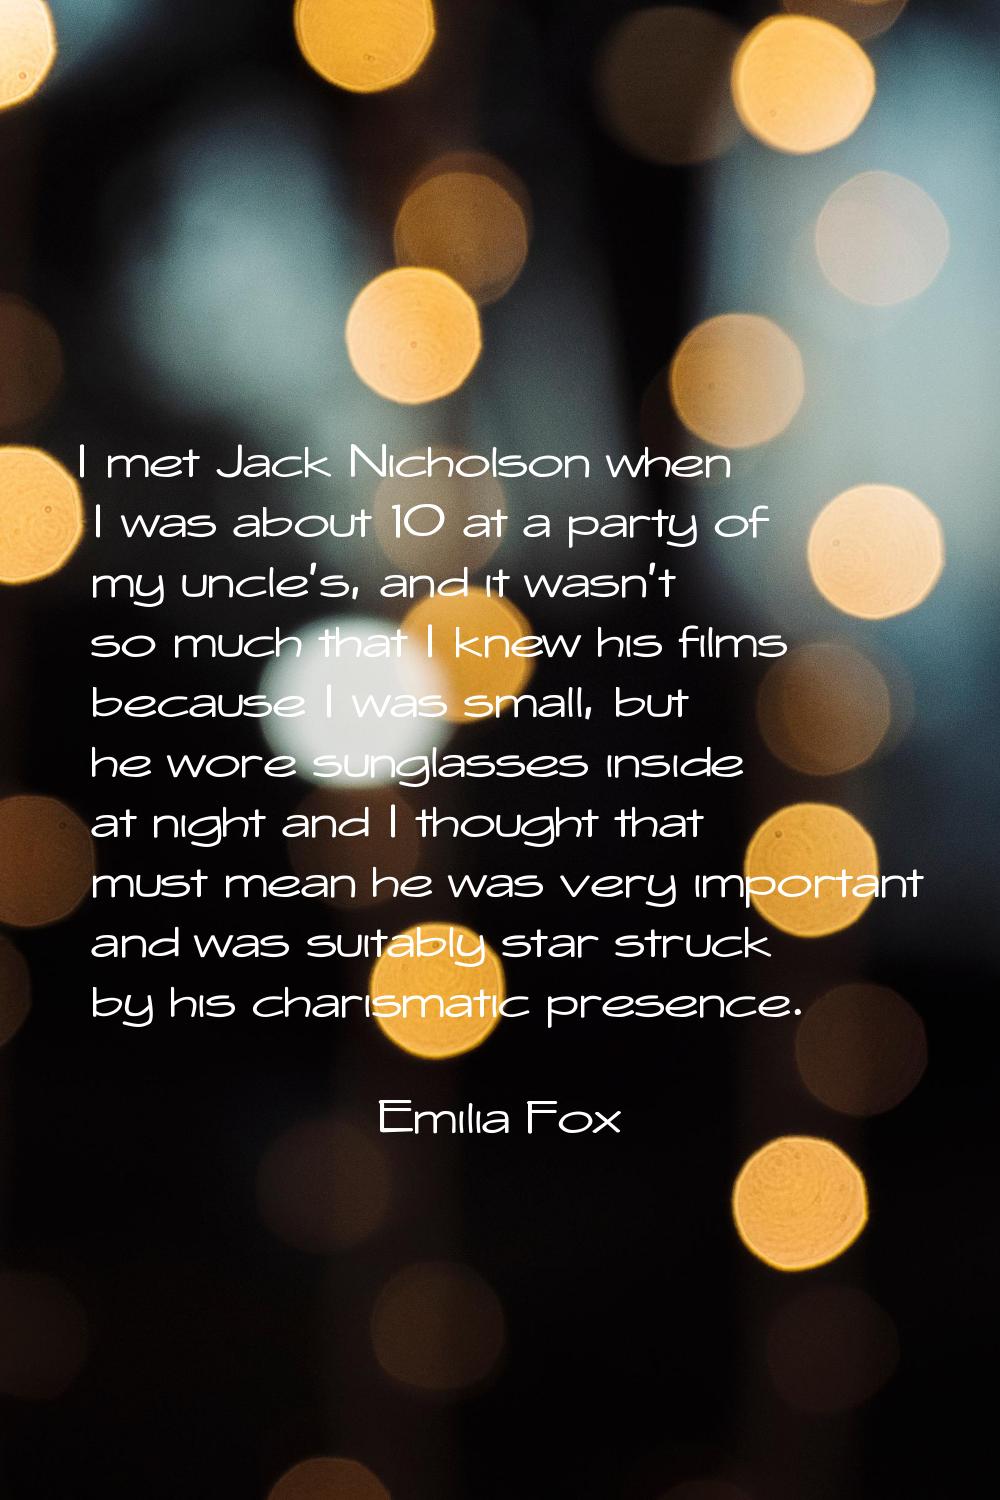 I met Jack Nicholson when I was about 10 at a party of my uncle's, and it wasn't so much that I kne